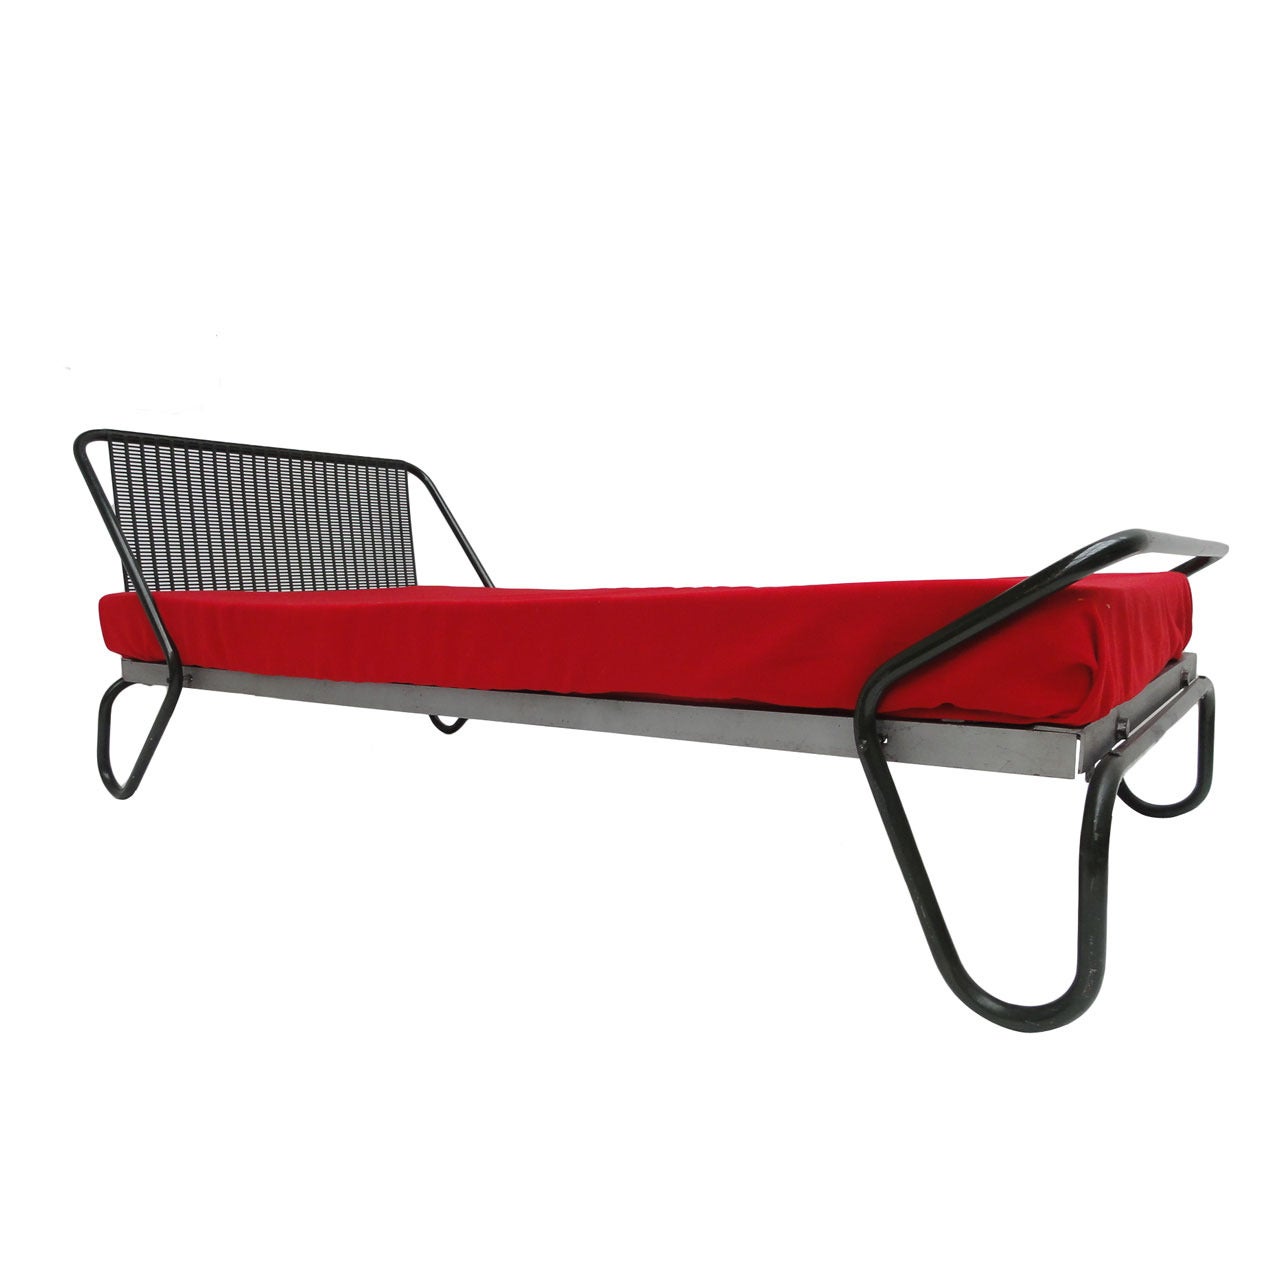 1952 'Miami' Daybed by Jacques Hitier for the Famous 'Antony' Building, Paris